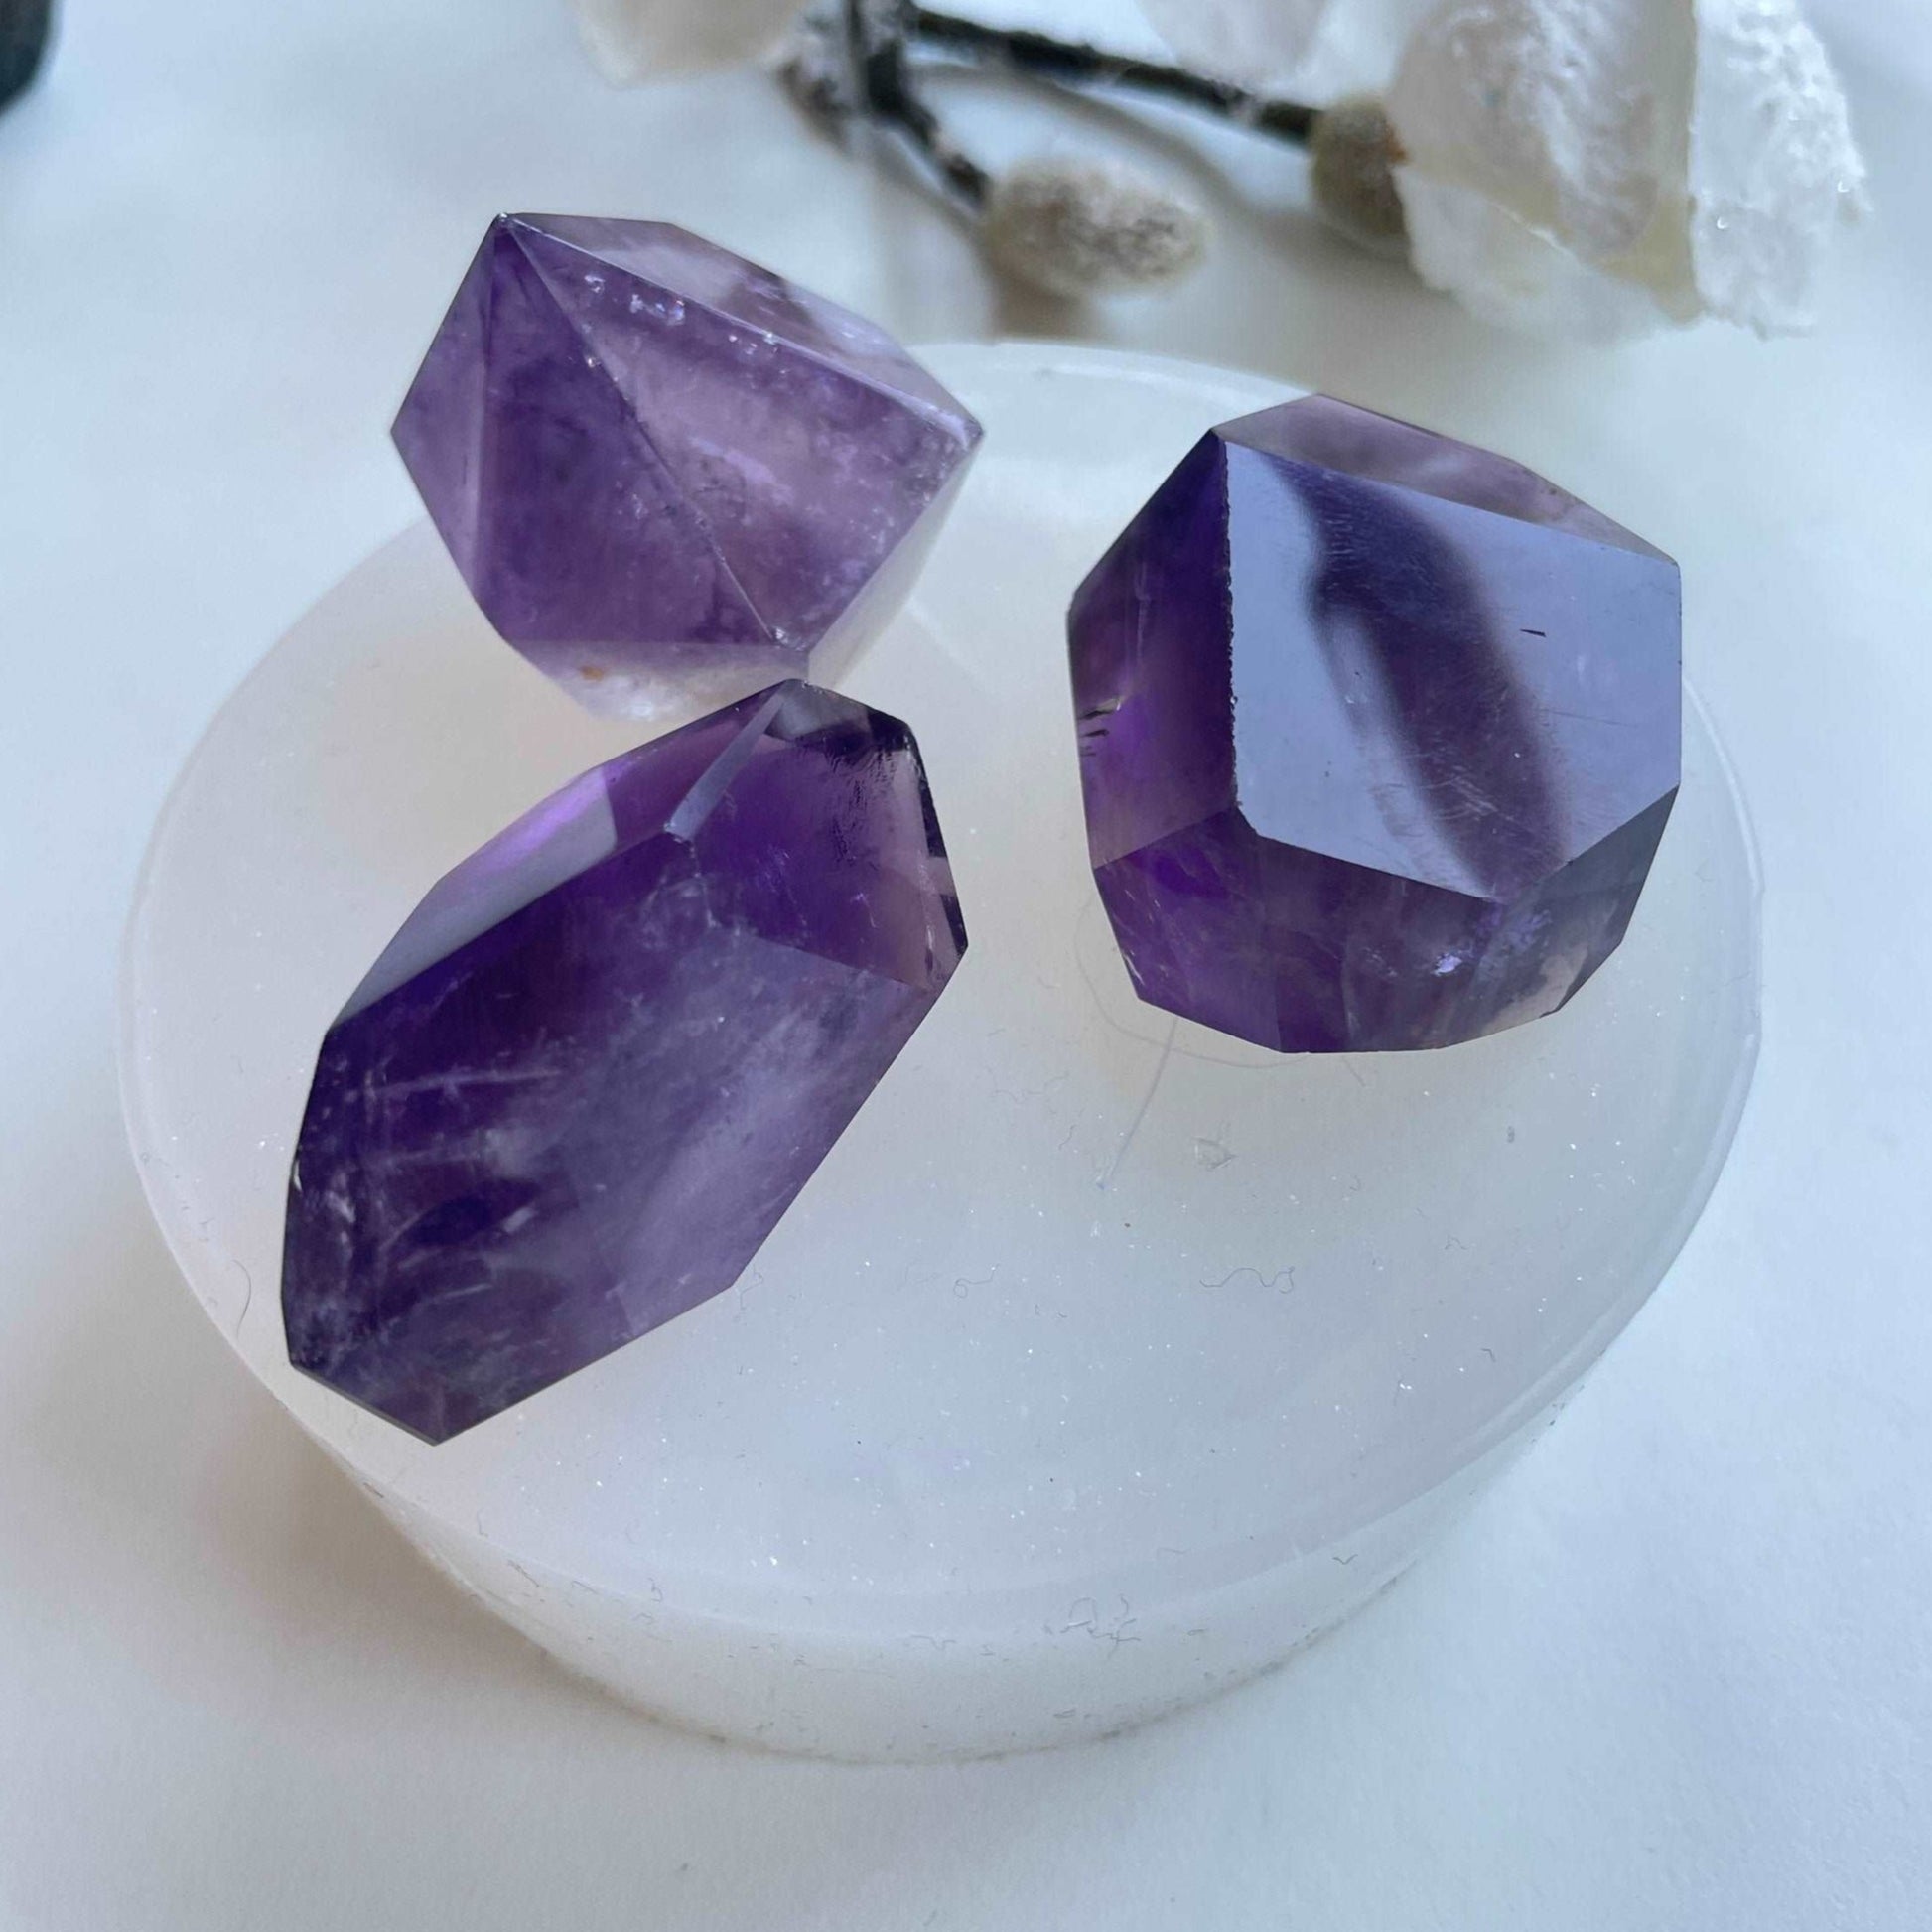 3 Large Amethyst Crystals Silicone mold. Stone mold art stone mold jewelry mold crystal personalized gifts handmade jewelry jewellery making